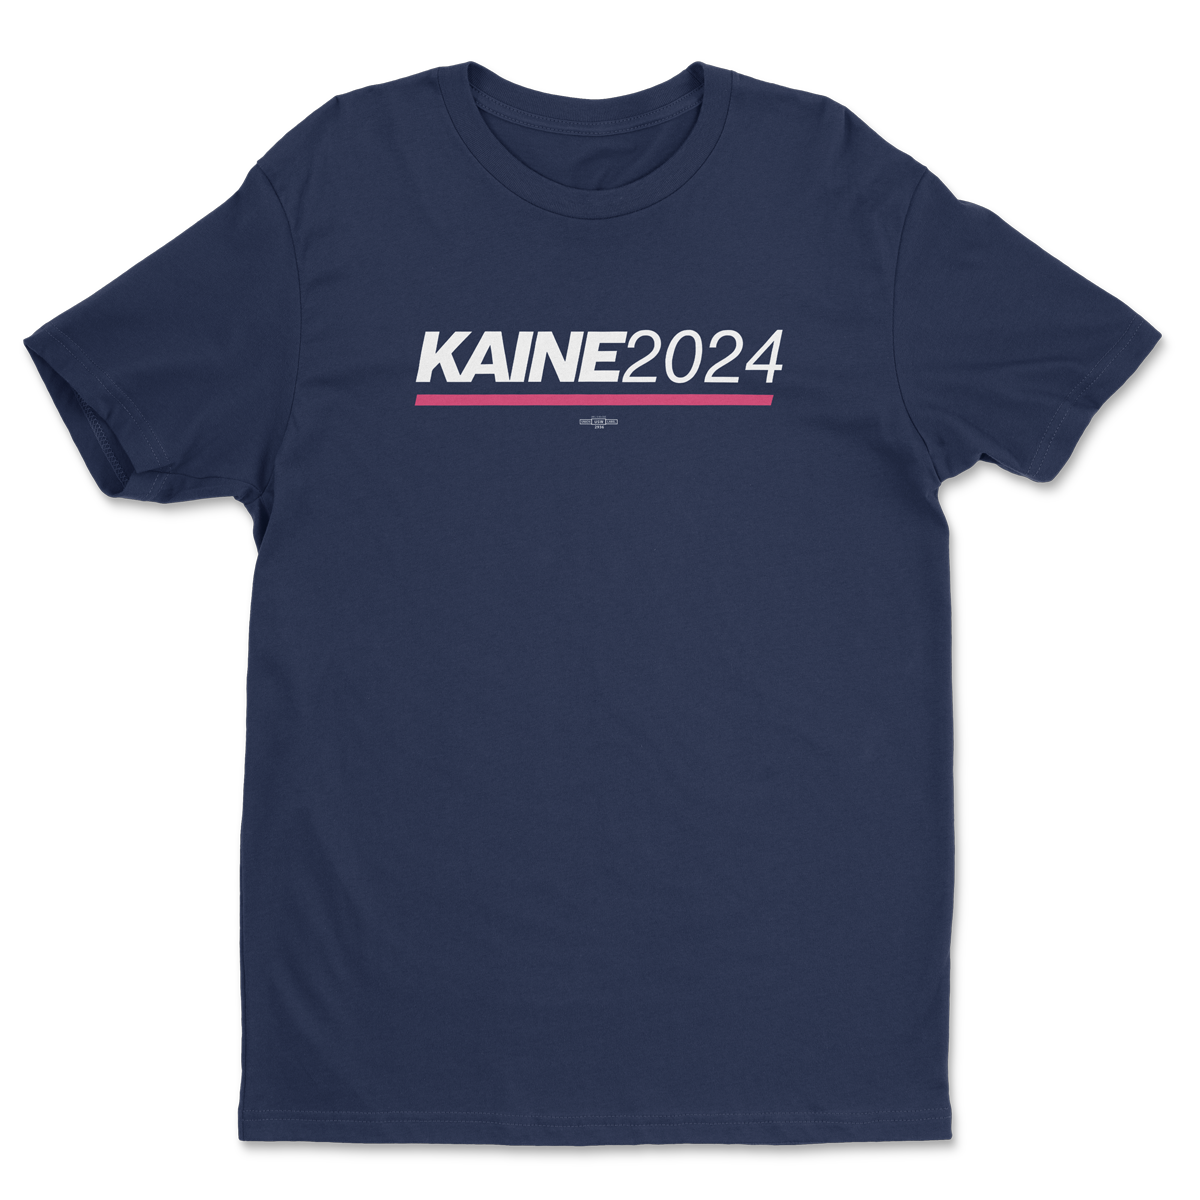 Campaign Tee